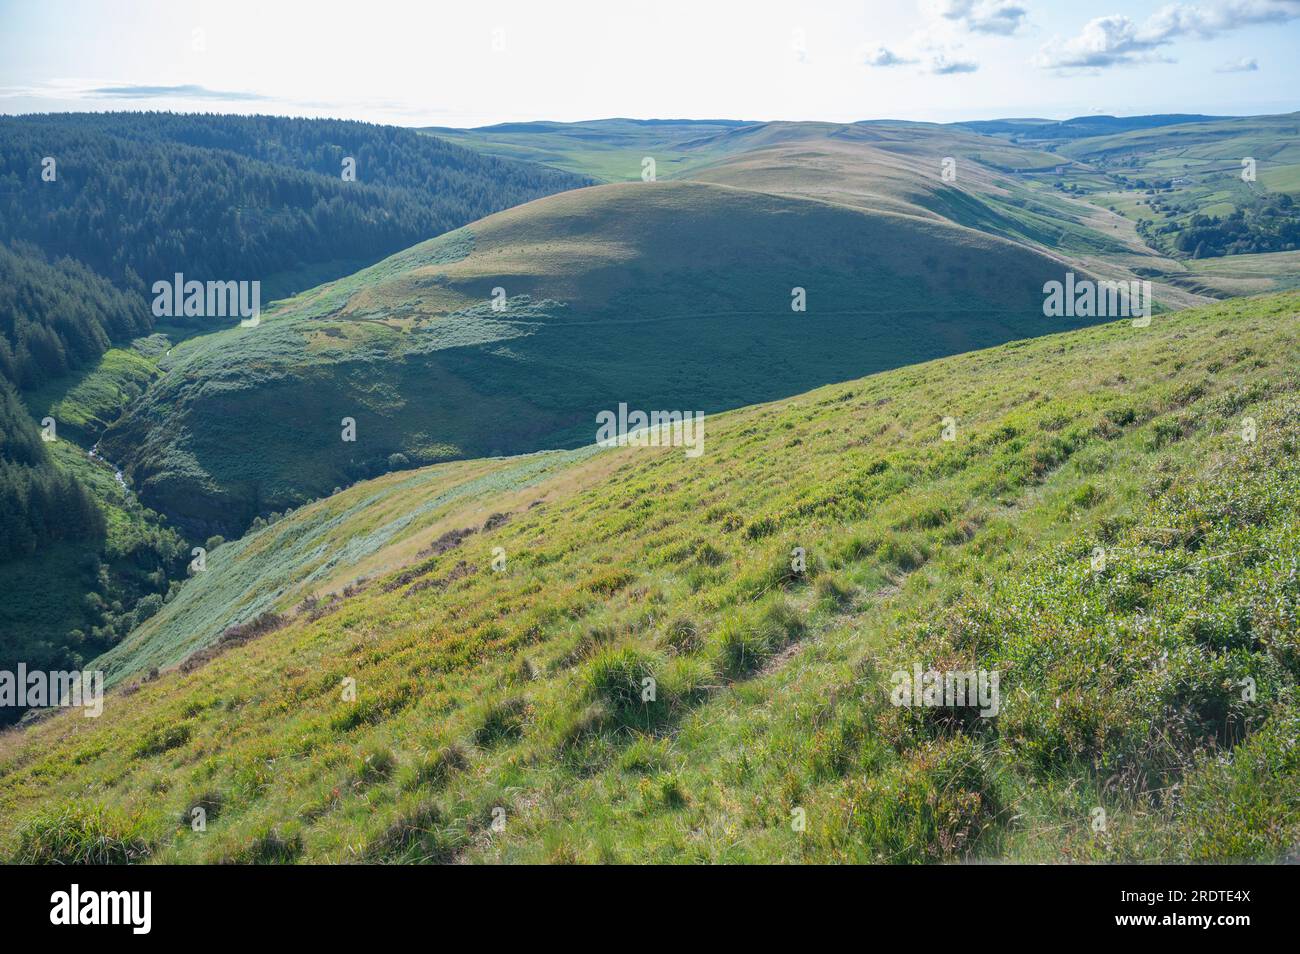 Hafod Las and Pen y Garfan forming a barren upland area between the Pysgotwr Fawr and Fach, Mid-Wales, UK Stock Photo